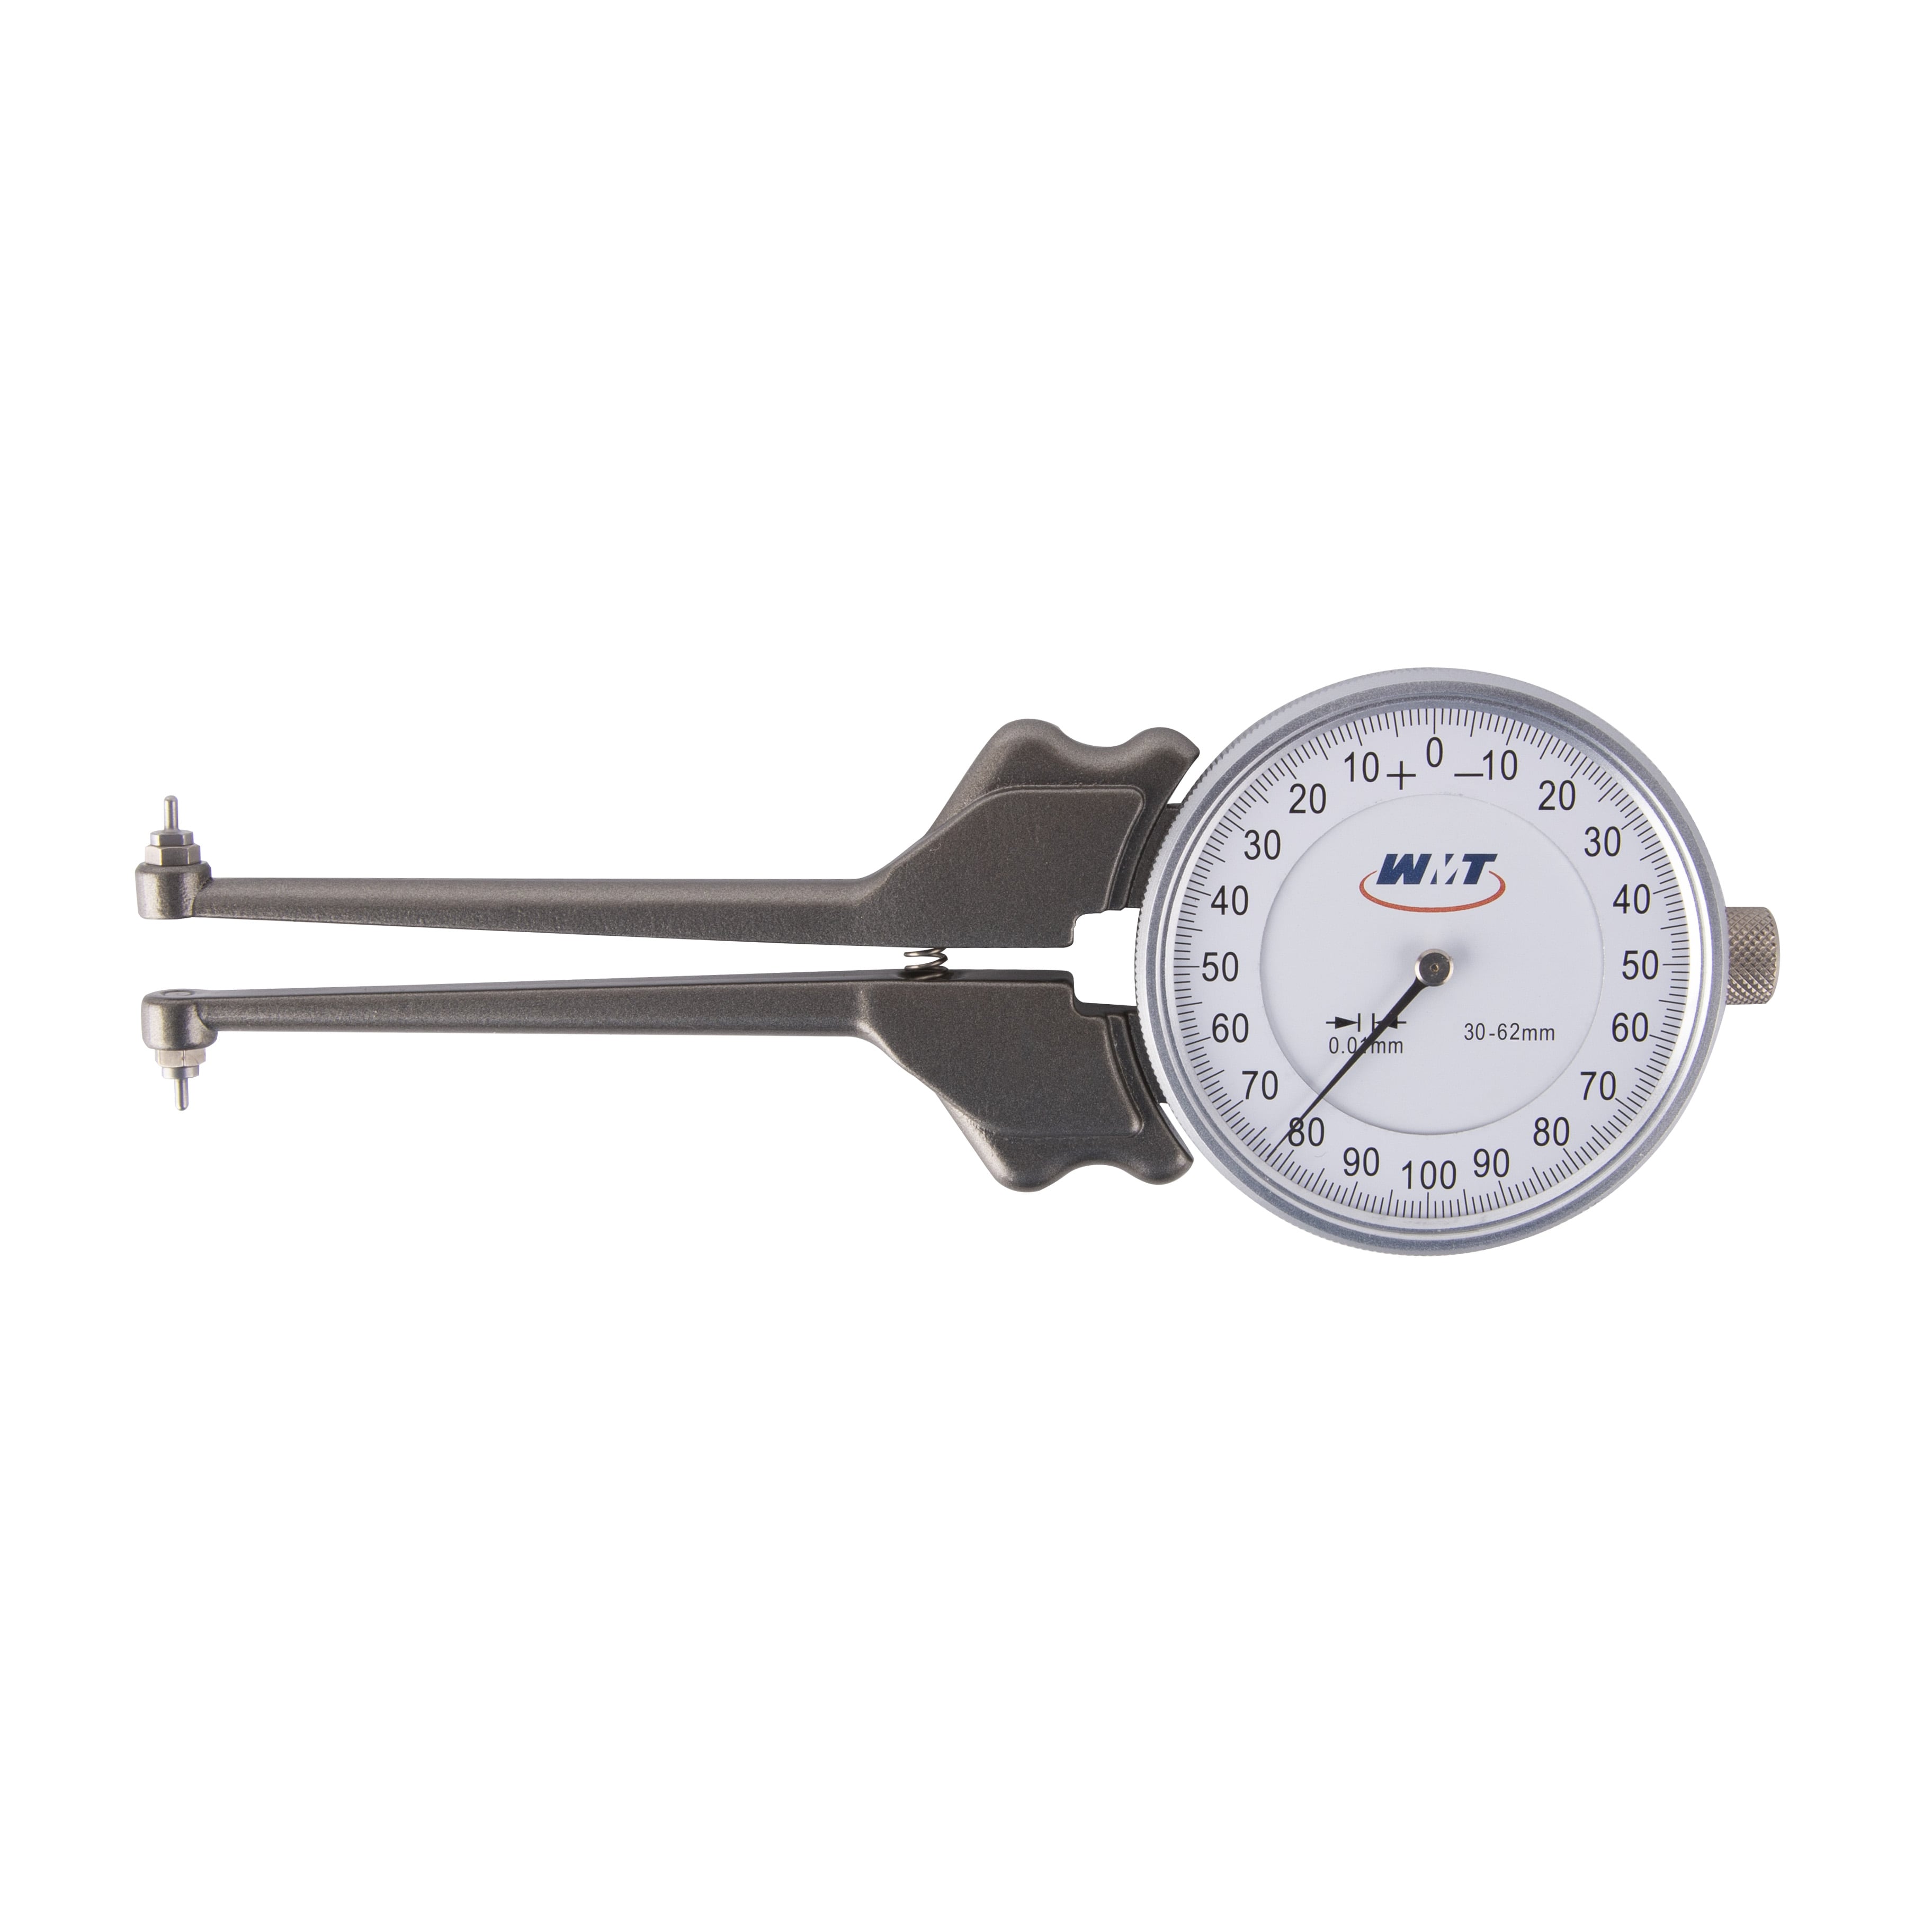 Inside Dial Caliper Gauges With Anvils 515-104